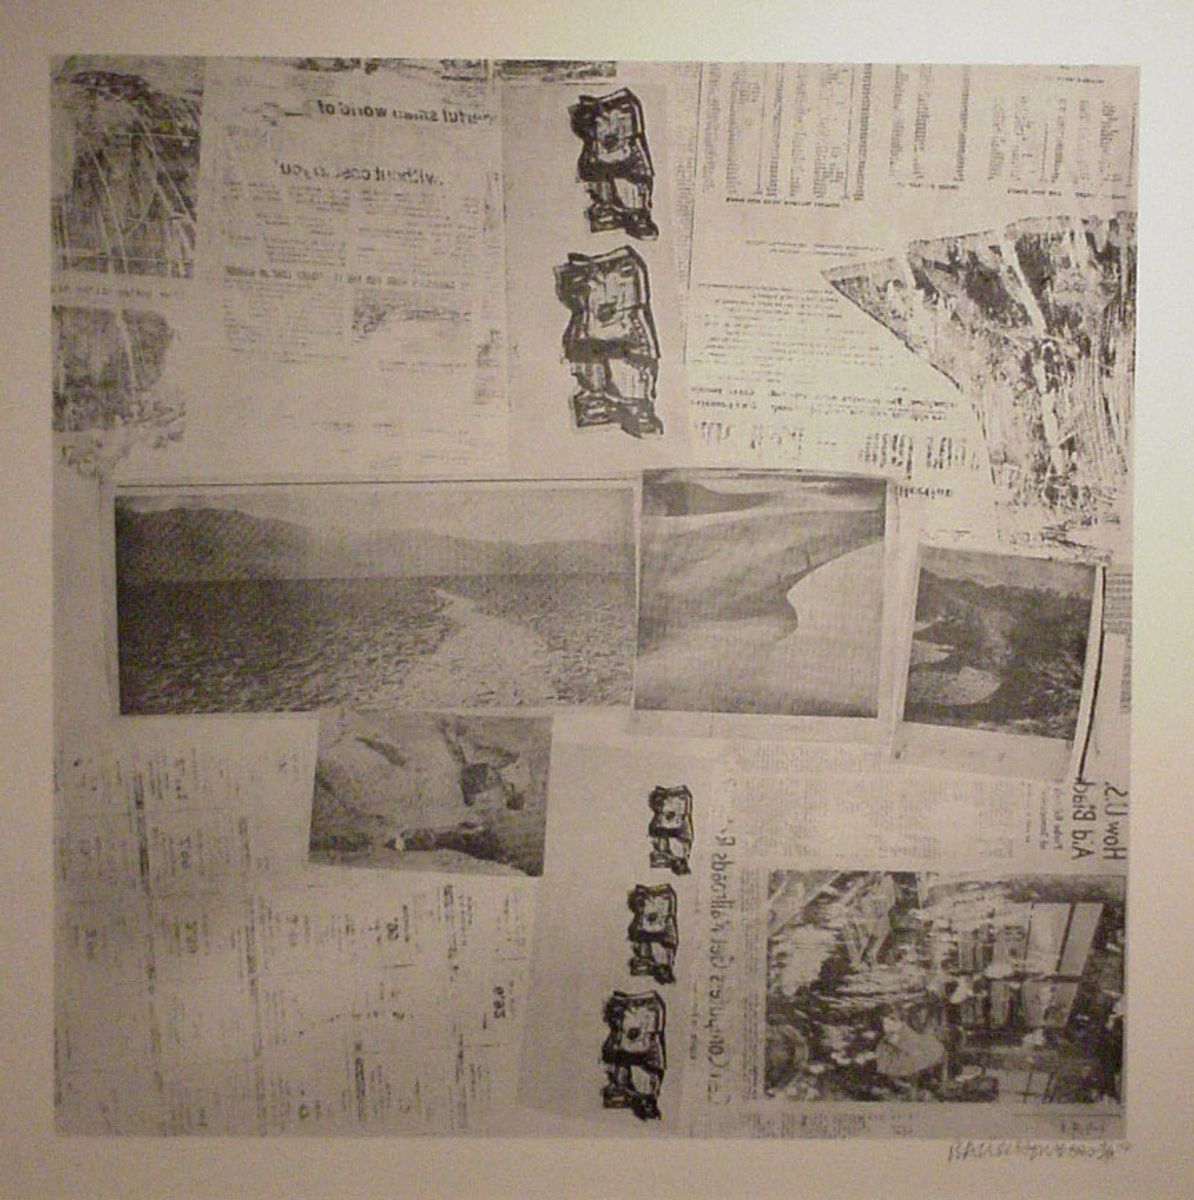 Licensed by Artists Rights Society (ARS) New York, NY http://www.arsny.com/
© Robert Rauschenberg Foundation https://www.rauschenbergfoundation.org/